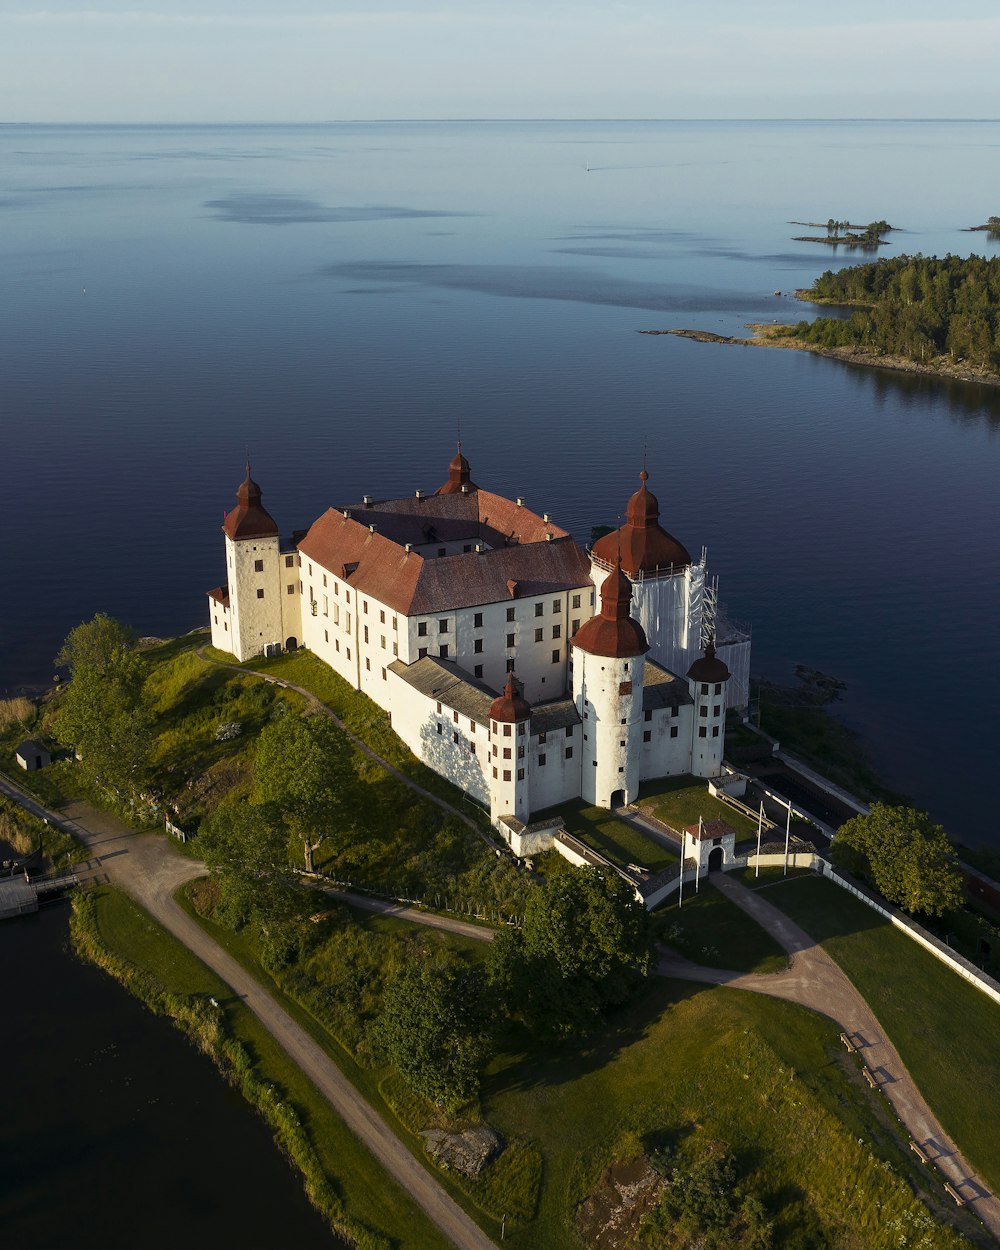 an aerial view of a castle on a small island